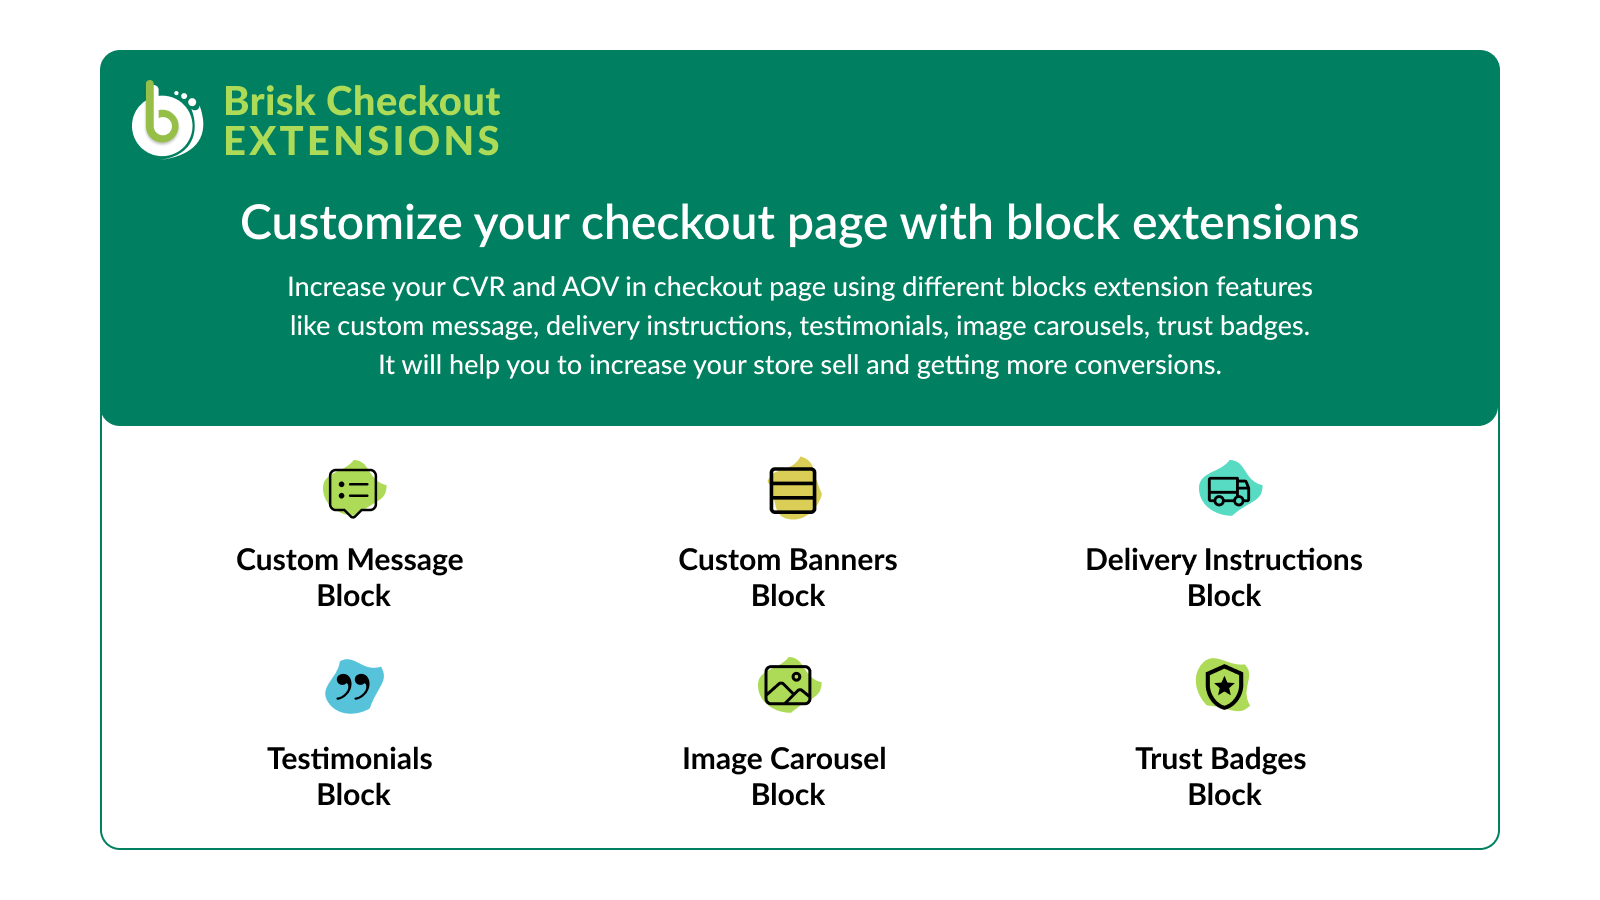 Brisk Checkout Extensions - All Blocks